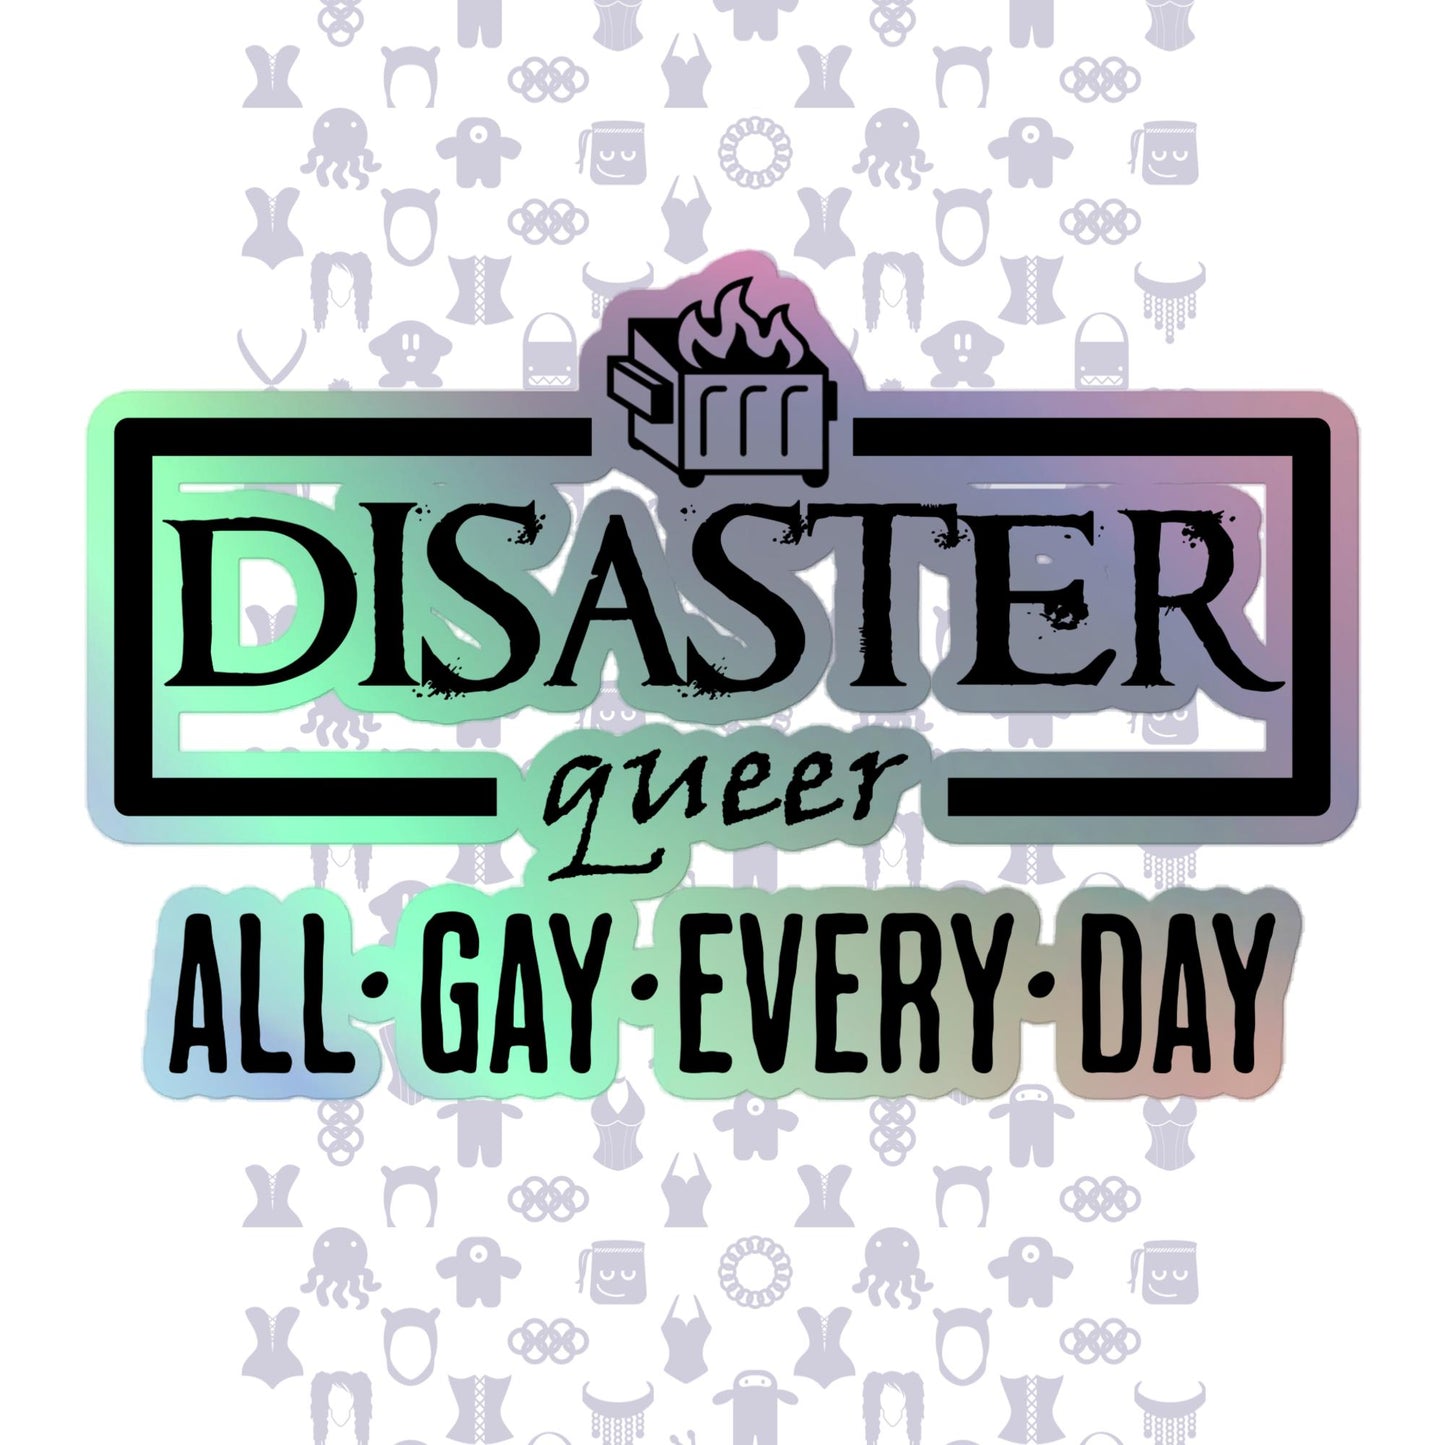 Disaster Queer Holographic Stickers